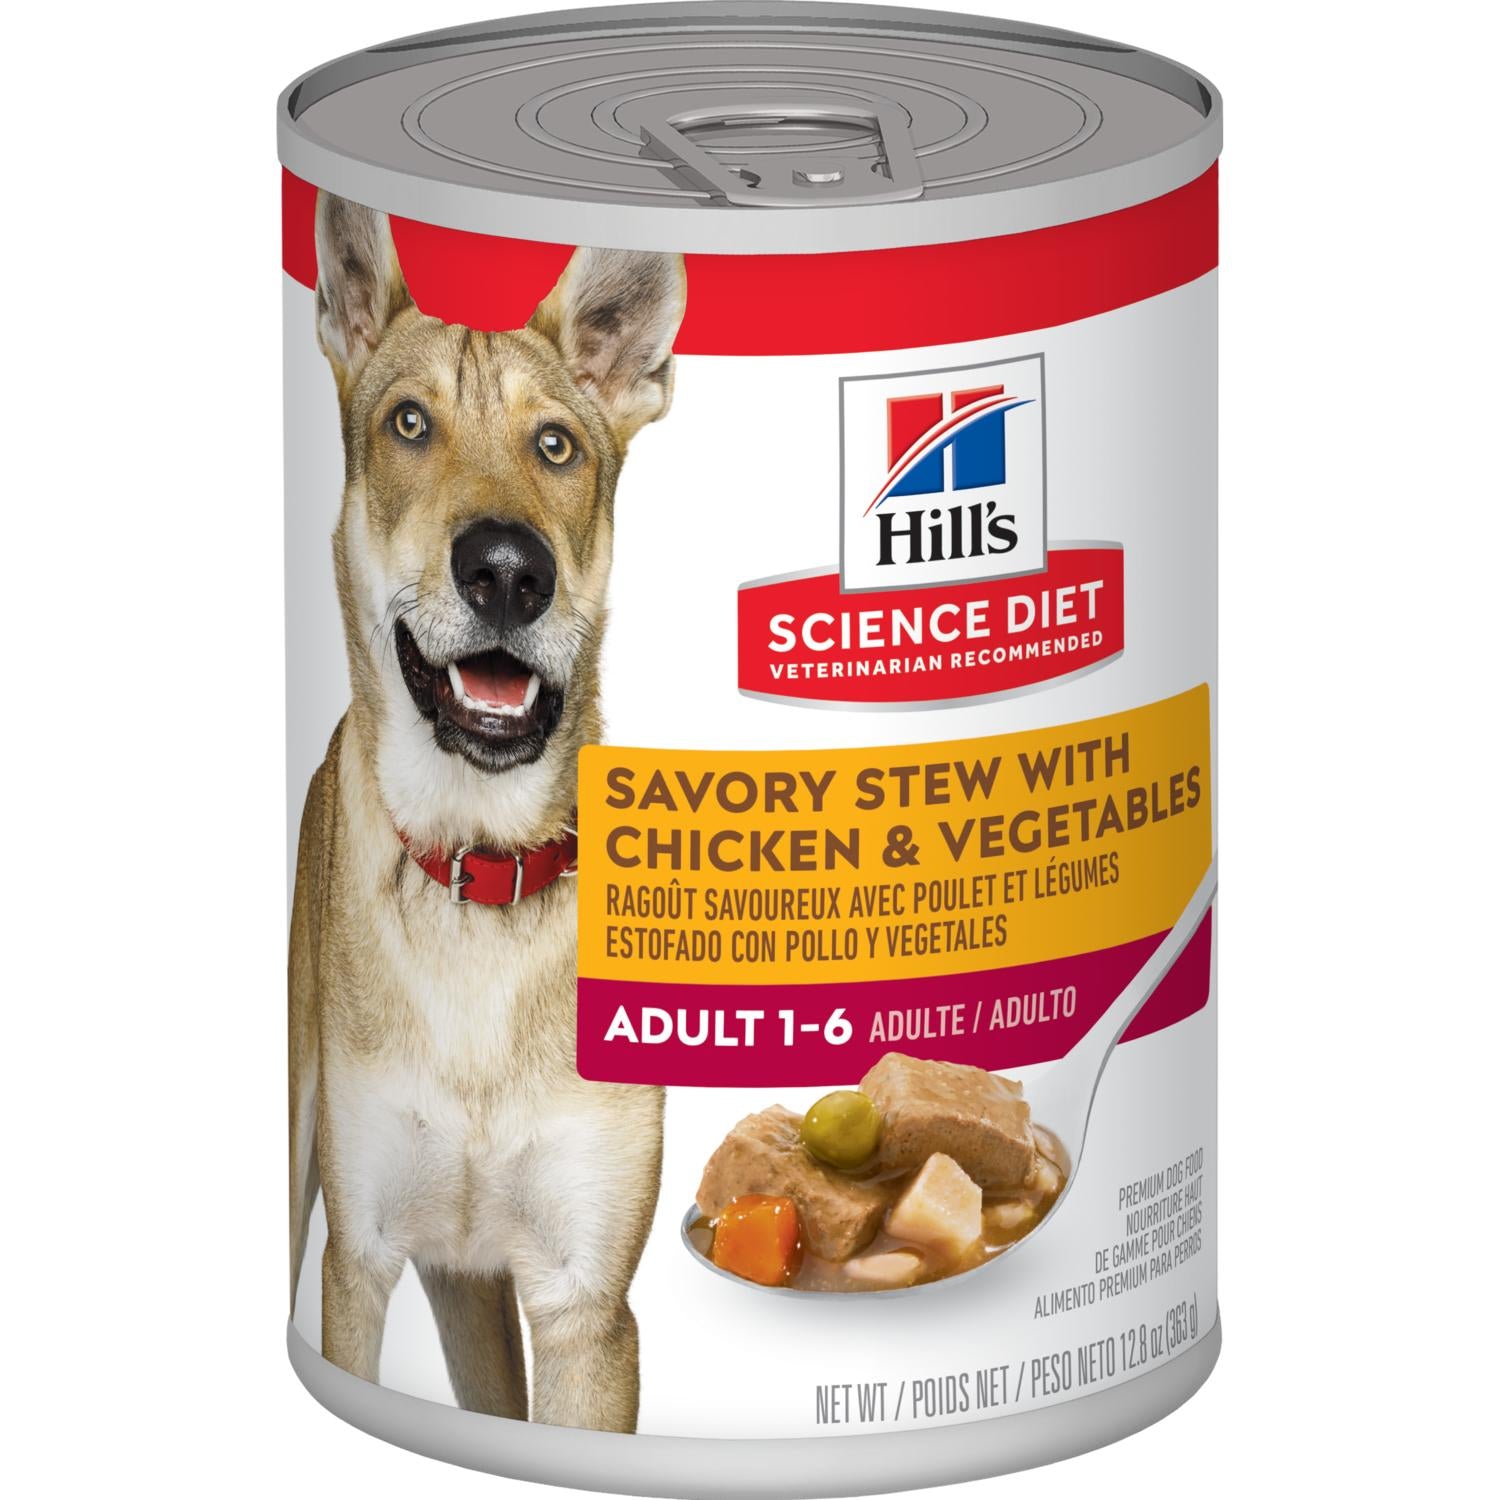 Hill's Science Diet Adult Savory Stew with Chicken & Vegetables dog food  Canned Dog Food  | PetMax Canada